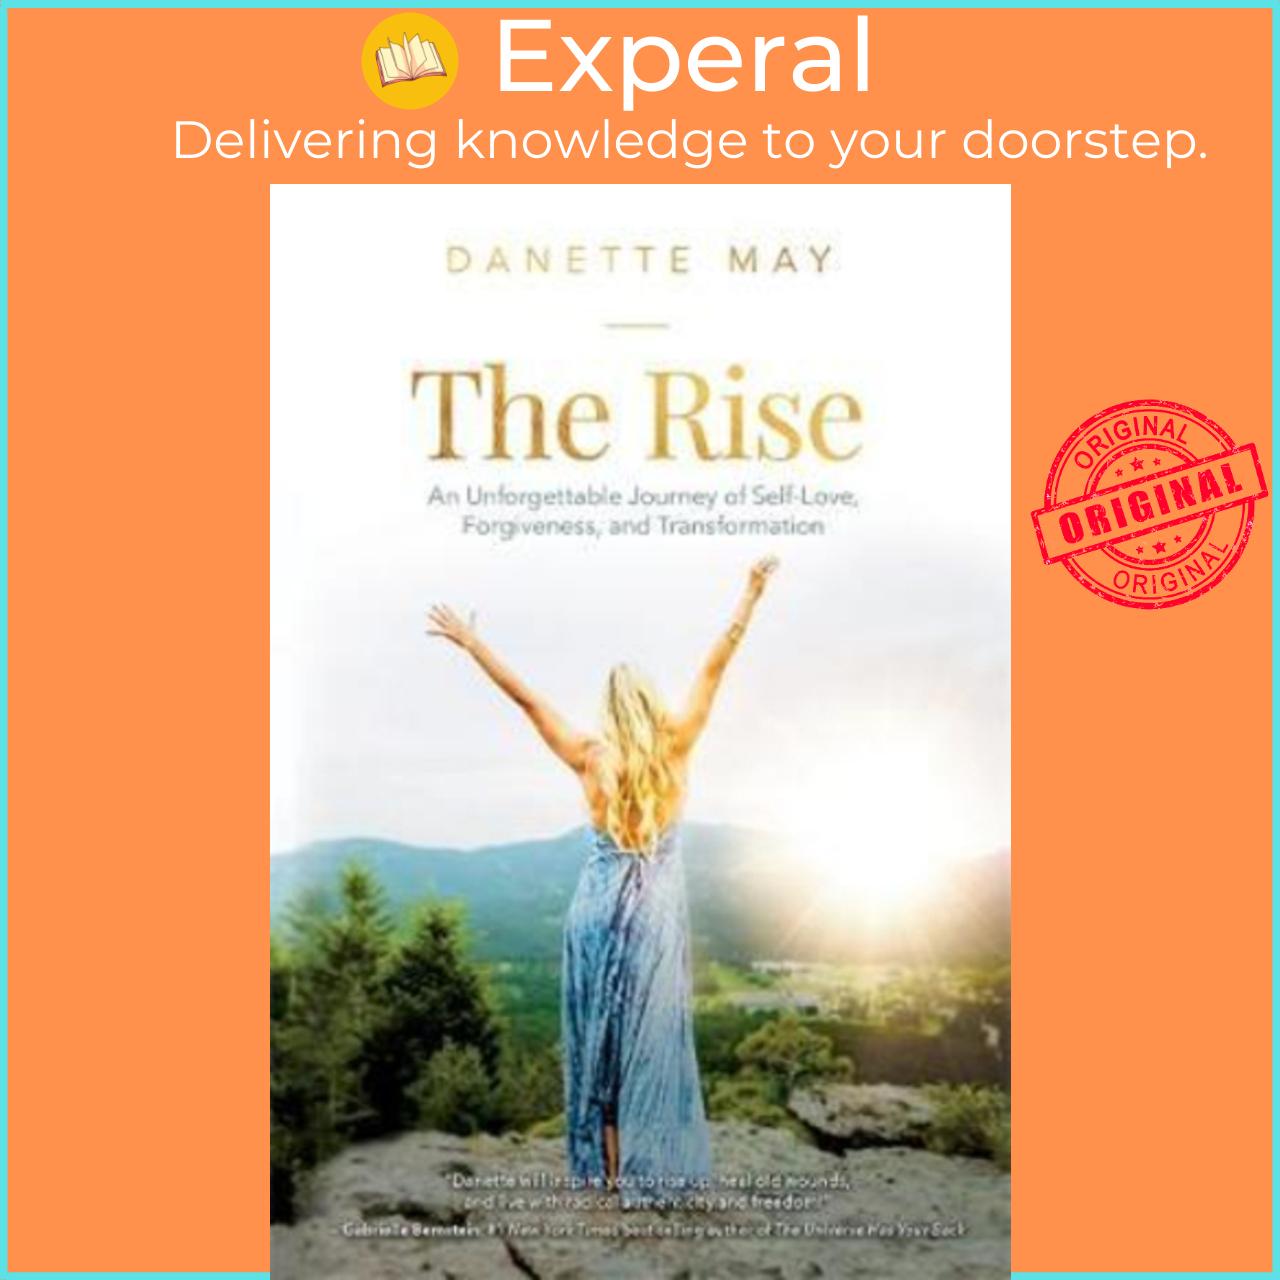 Sách - The Rise : An Unforgettable Journey of Self-Love, Forgiveness, and Transfo by Danette May (US edition, paperback)